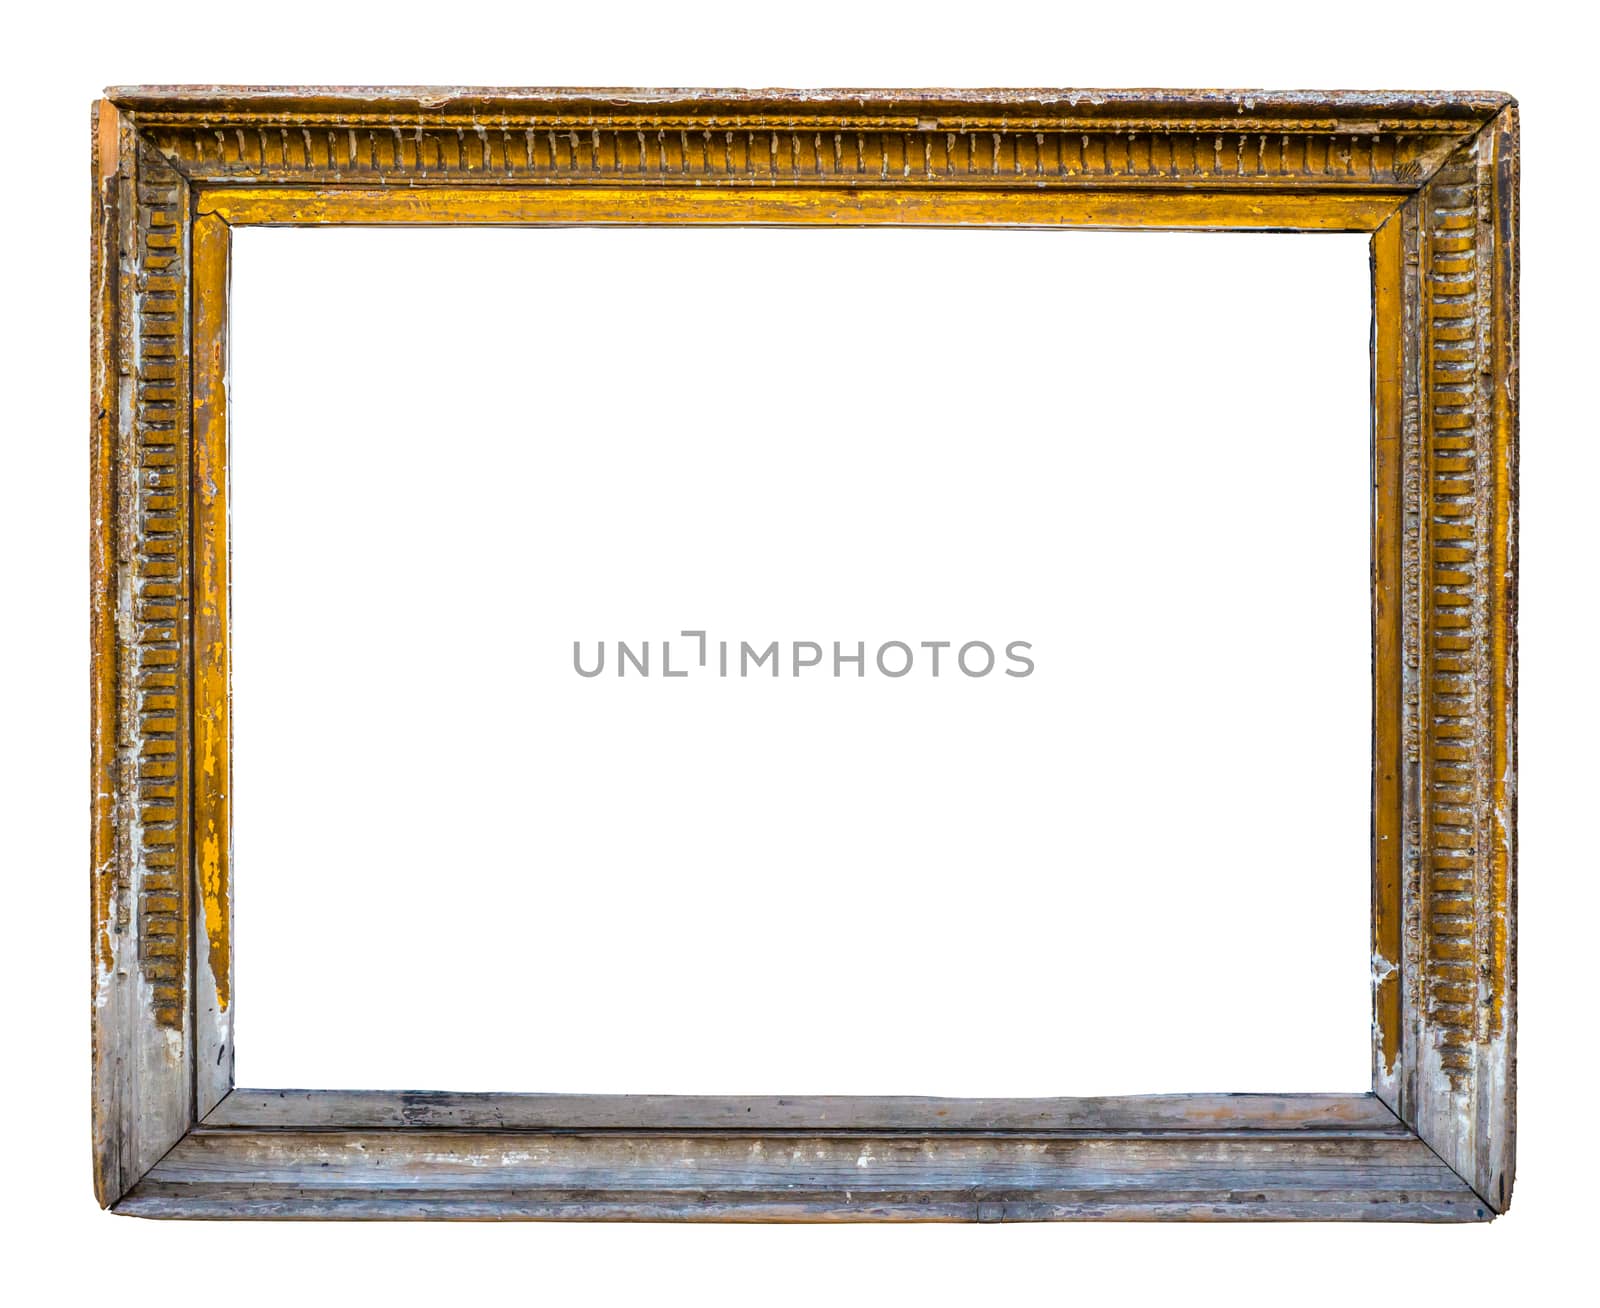 Isolated Grungy Rustic Ornate Peeling Gold Colored Art Frame